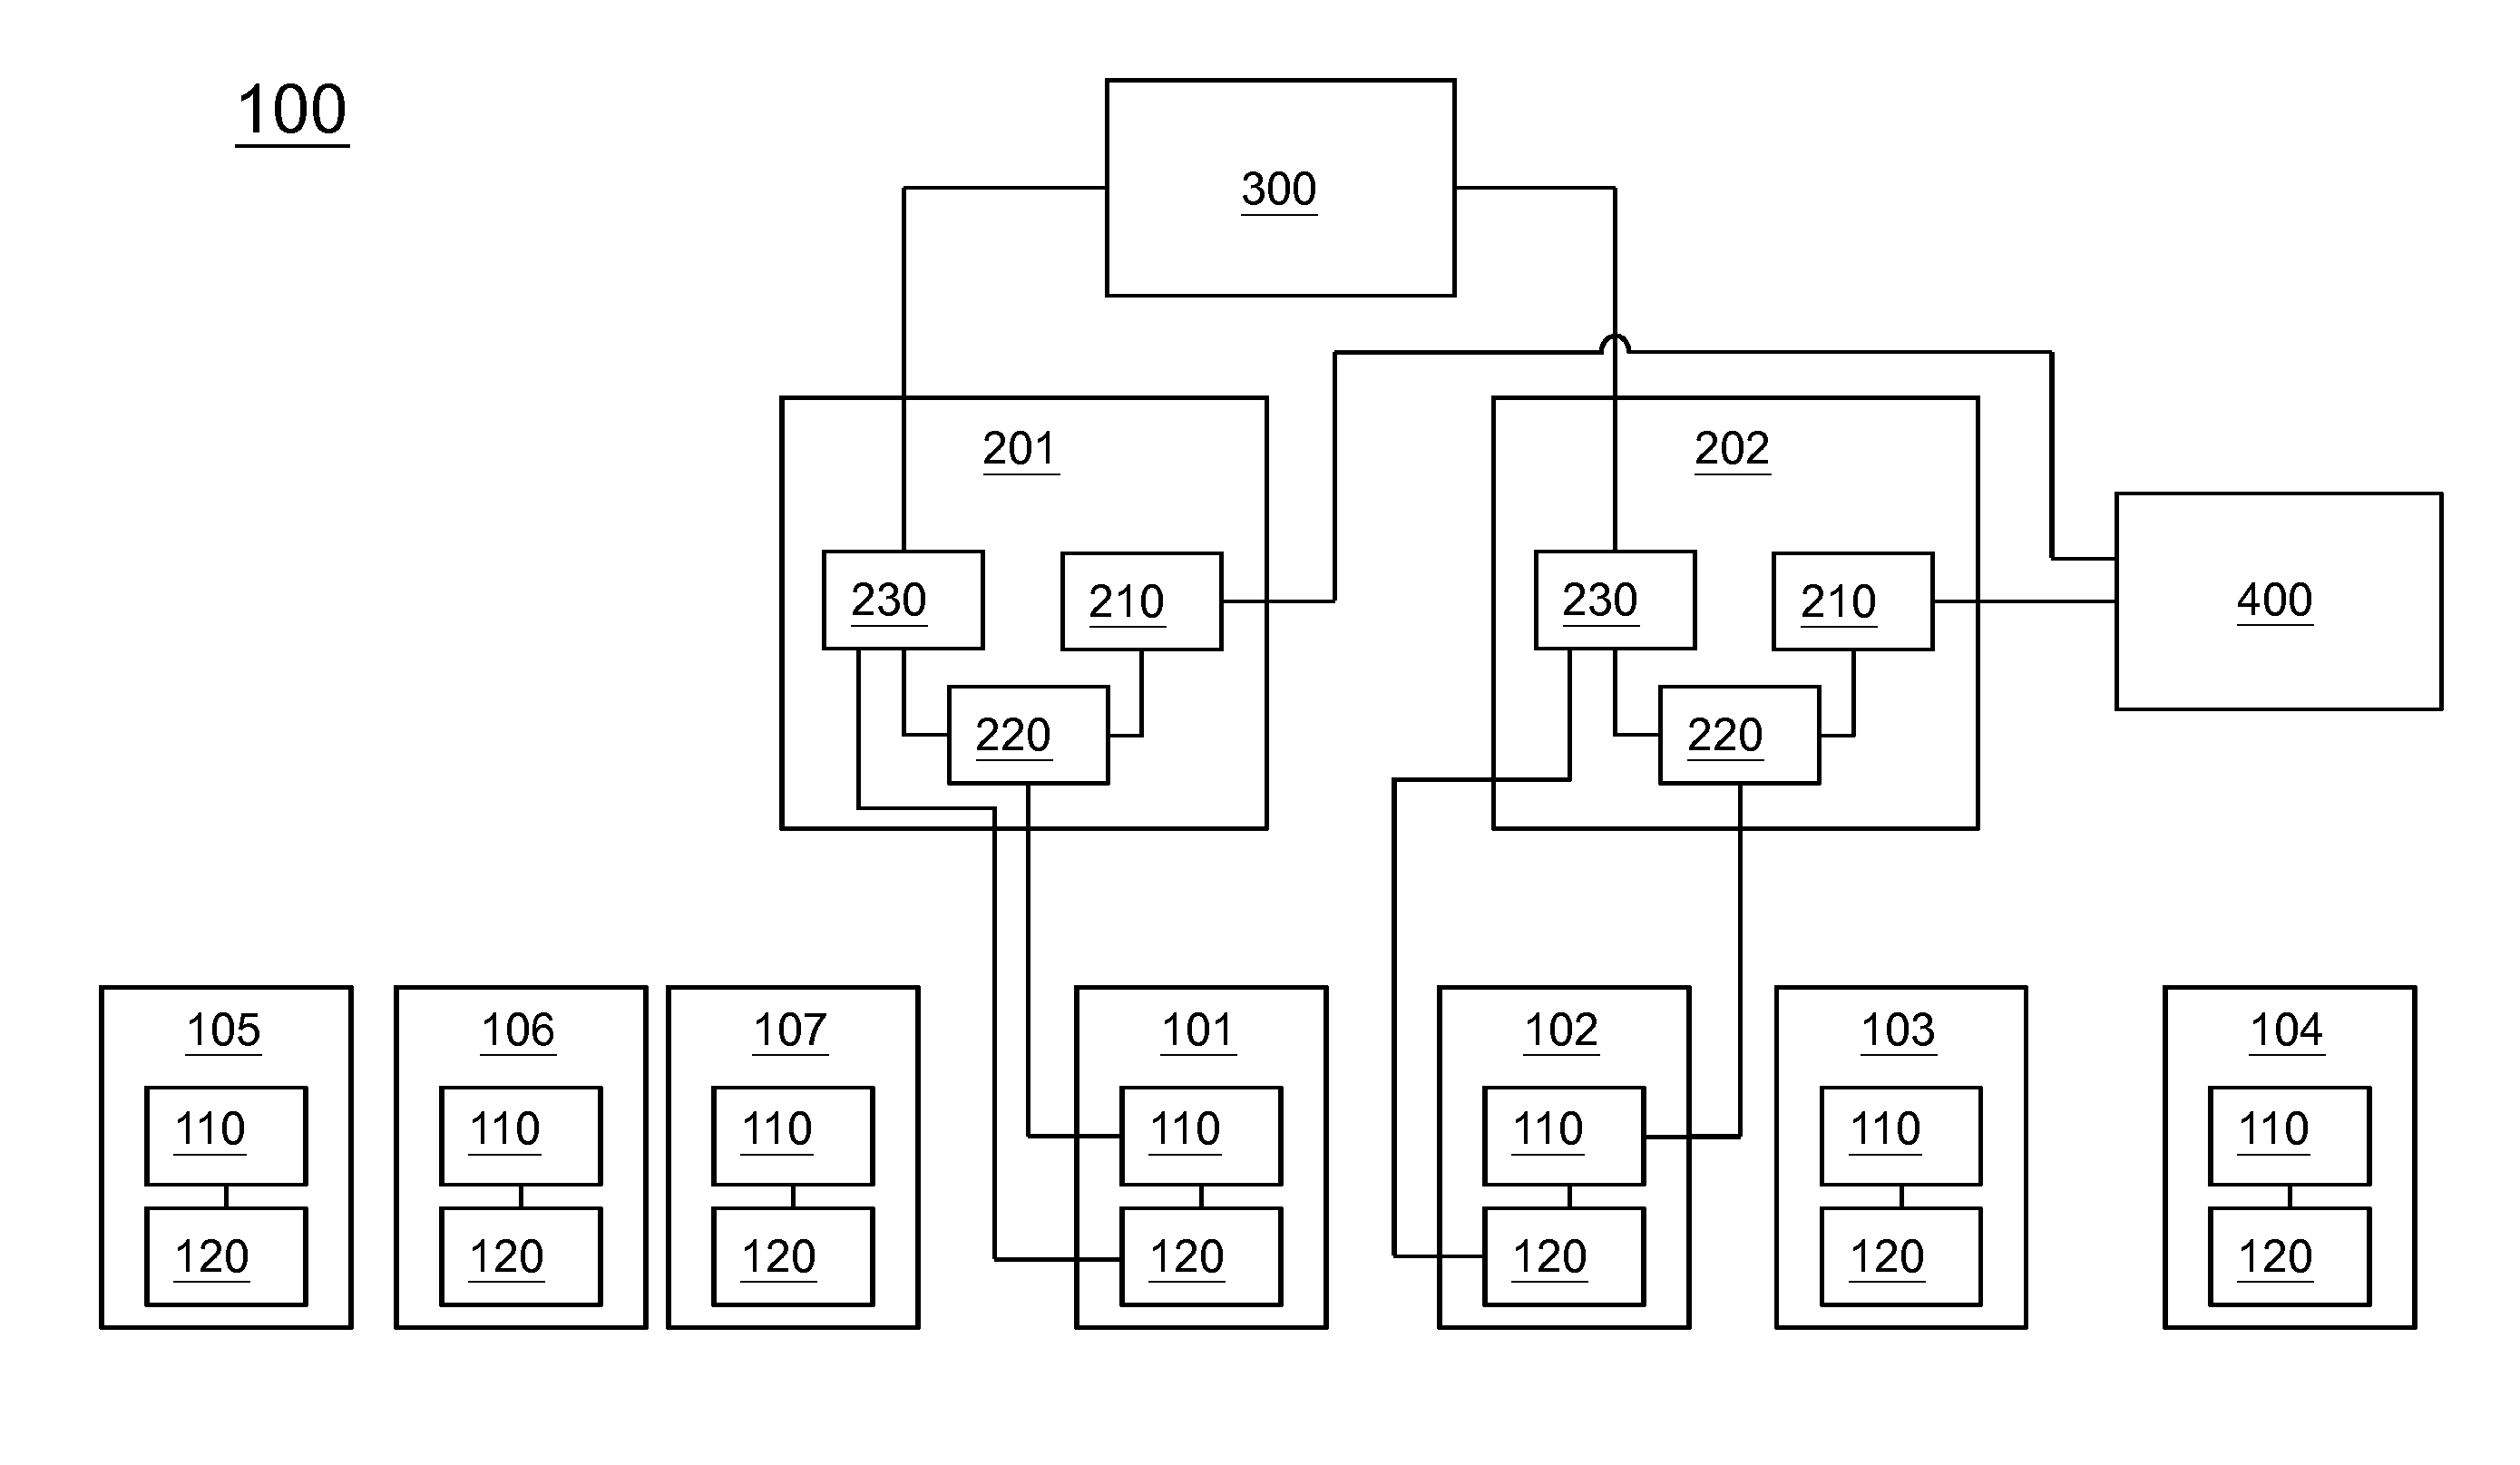 Battery sharing system